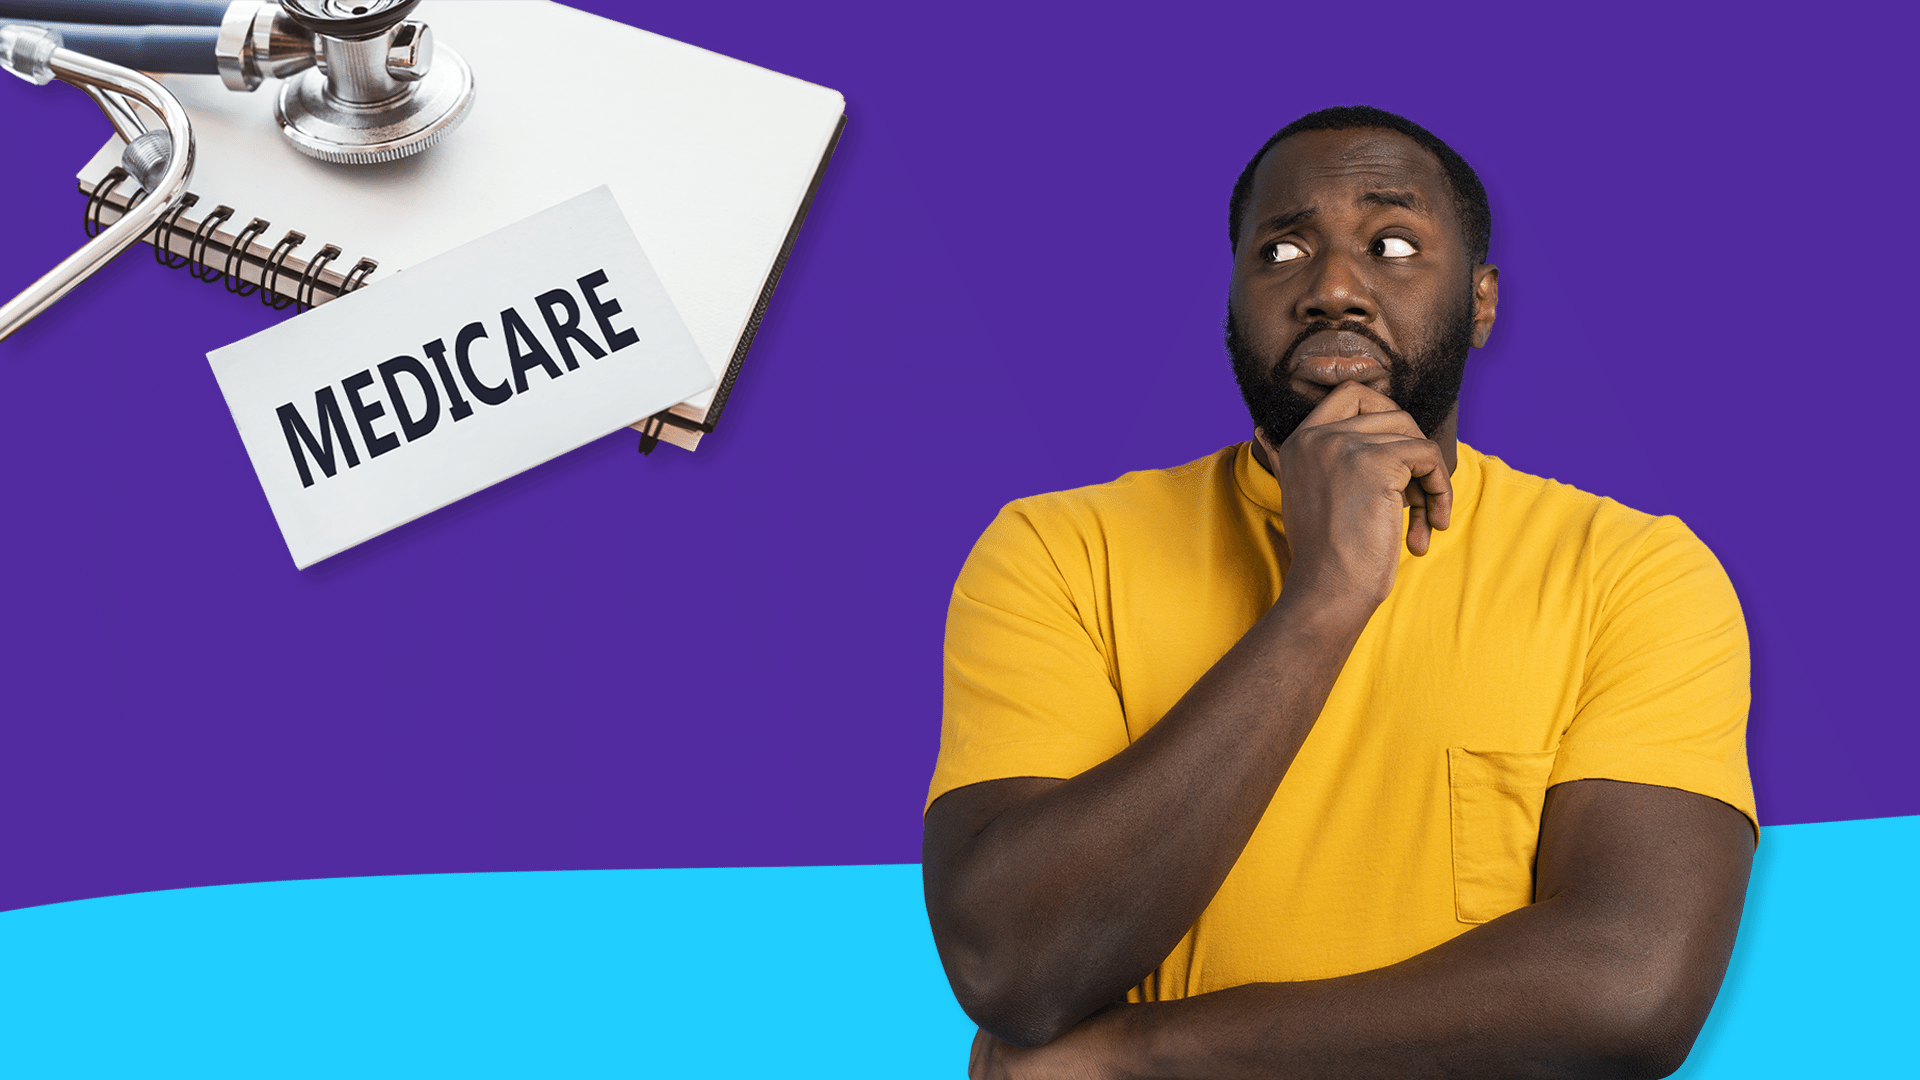 Man with questioning expression: How well do Americans know Medicare?